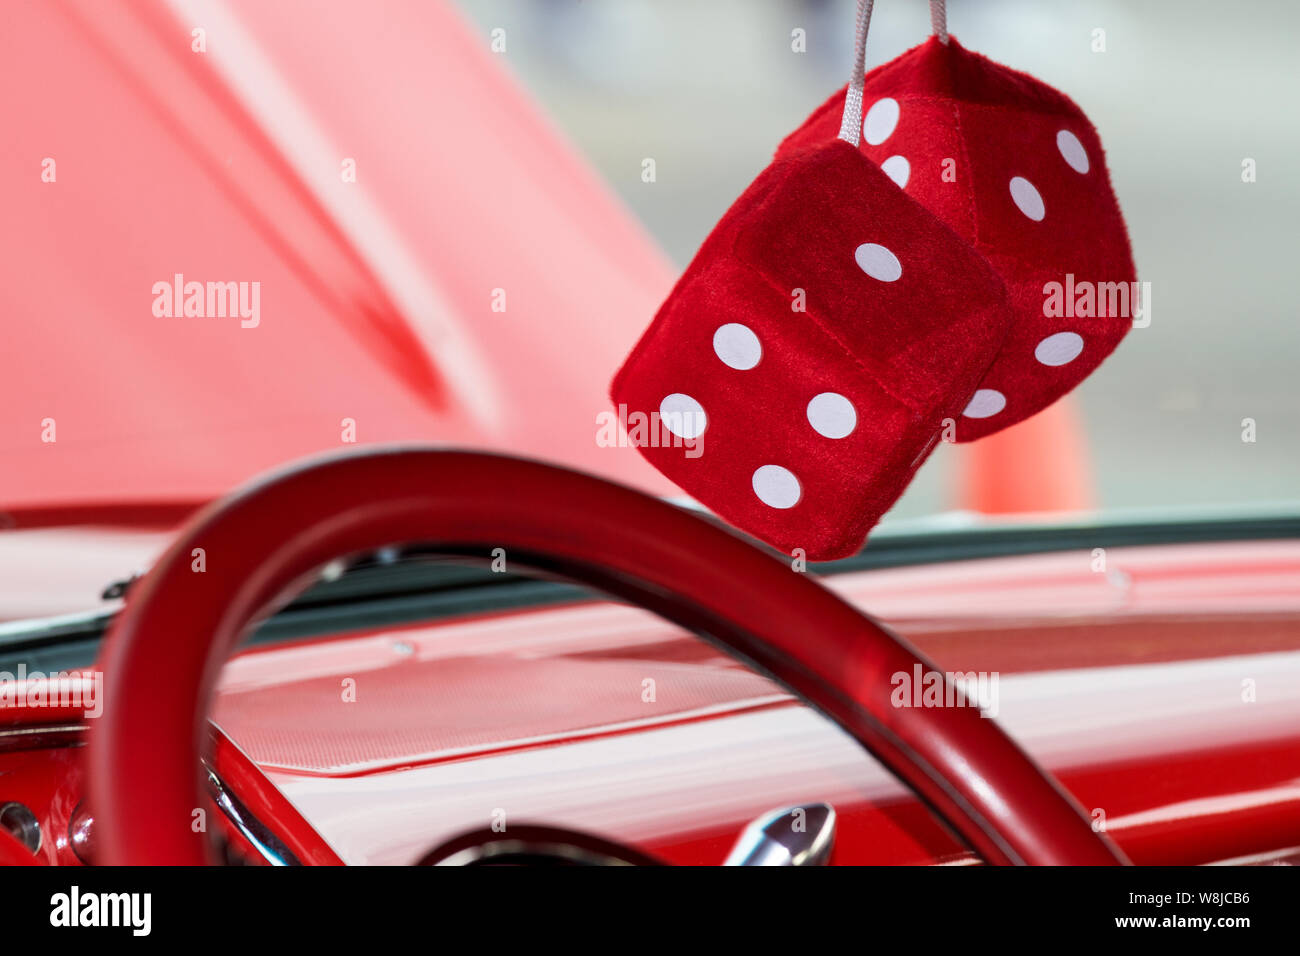 Motor City Vettes - Ever wonder why people hung fuzzy dice on their  rearview mirror? In WWII, pilots kept good luck trinkets with them. When  the war was over, this tradition translated